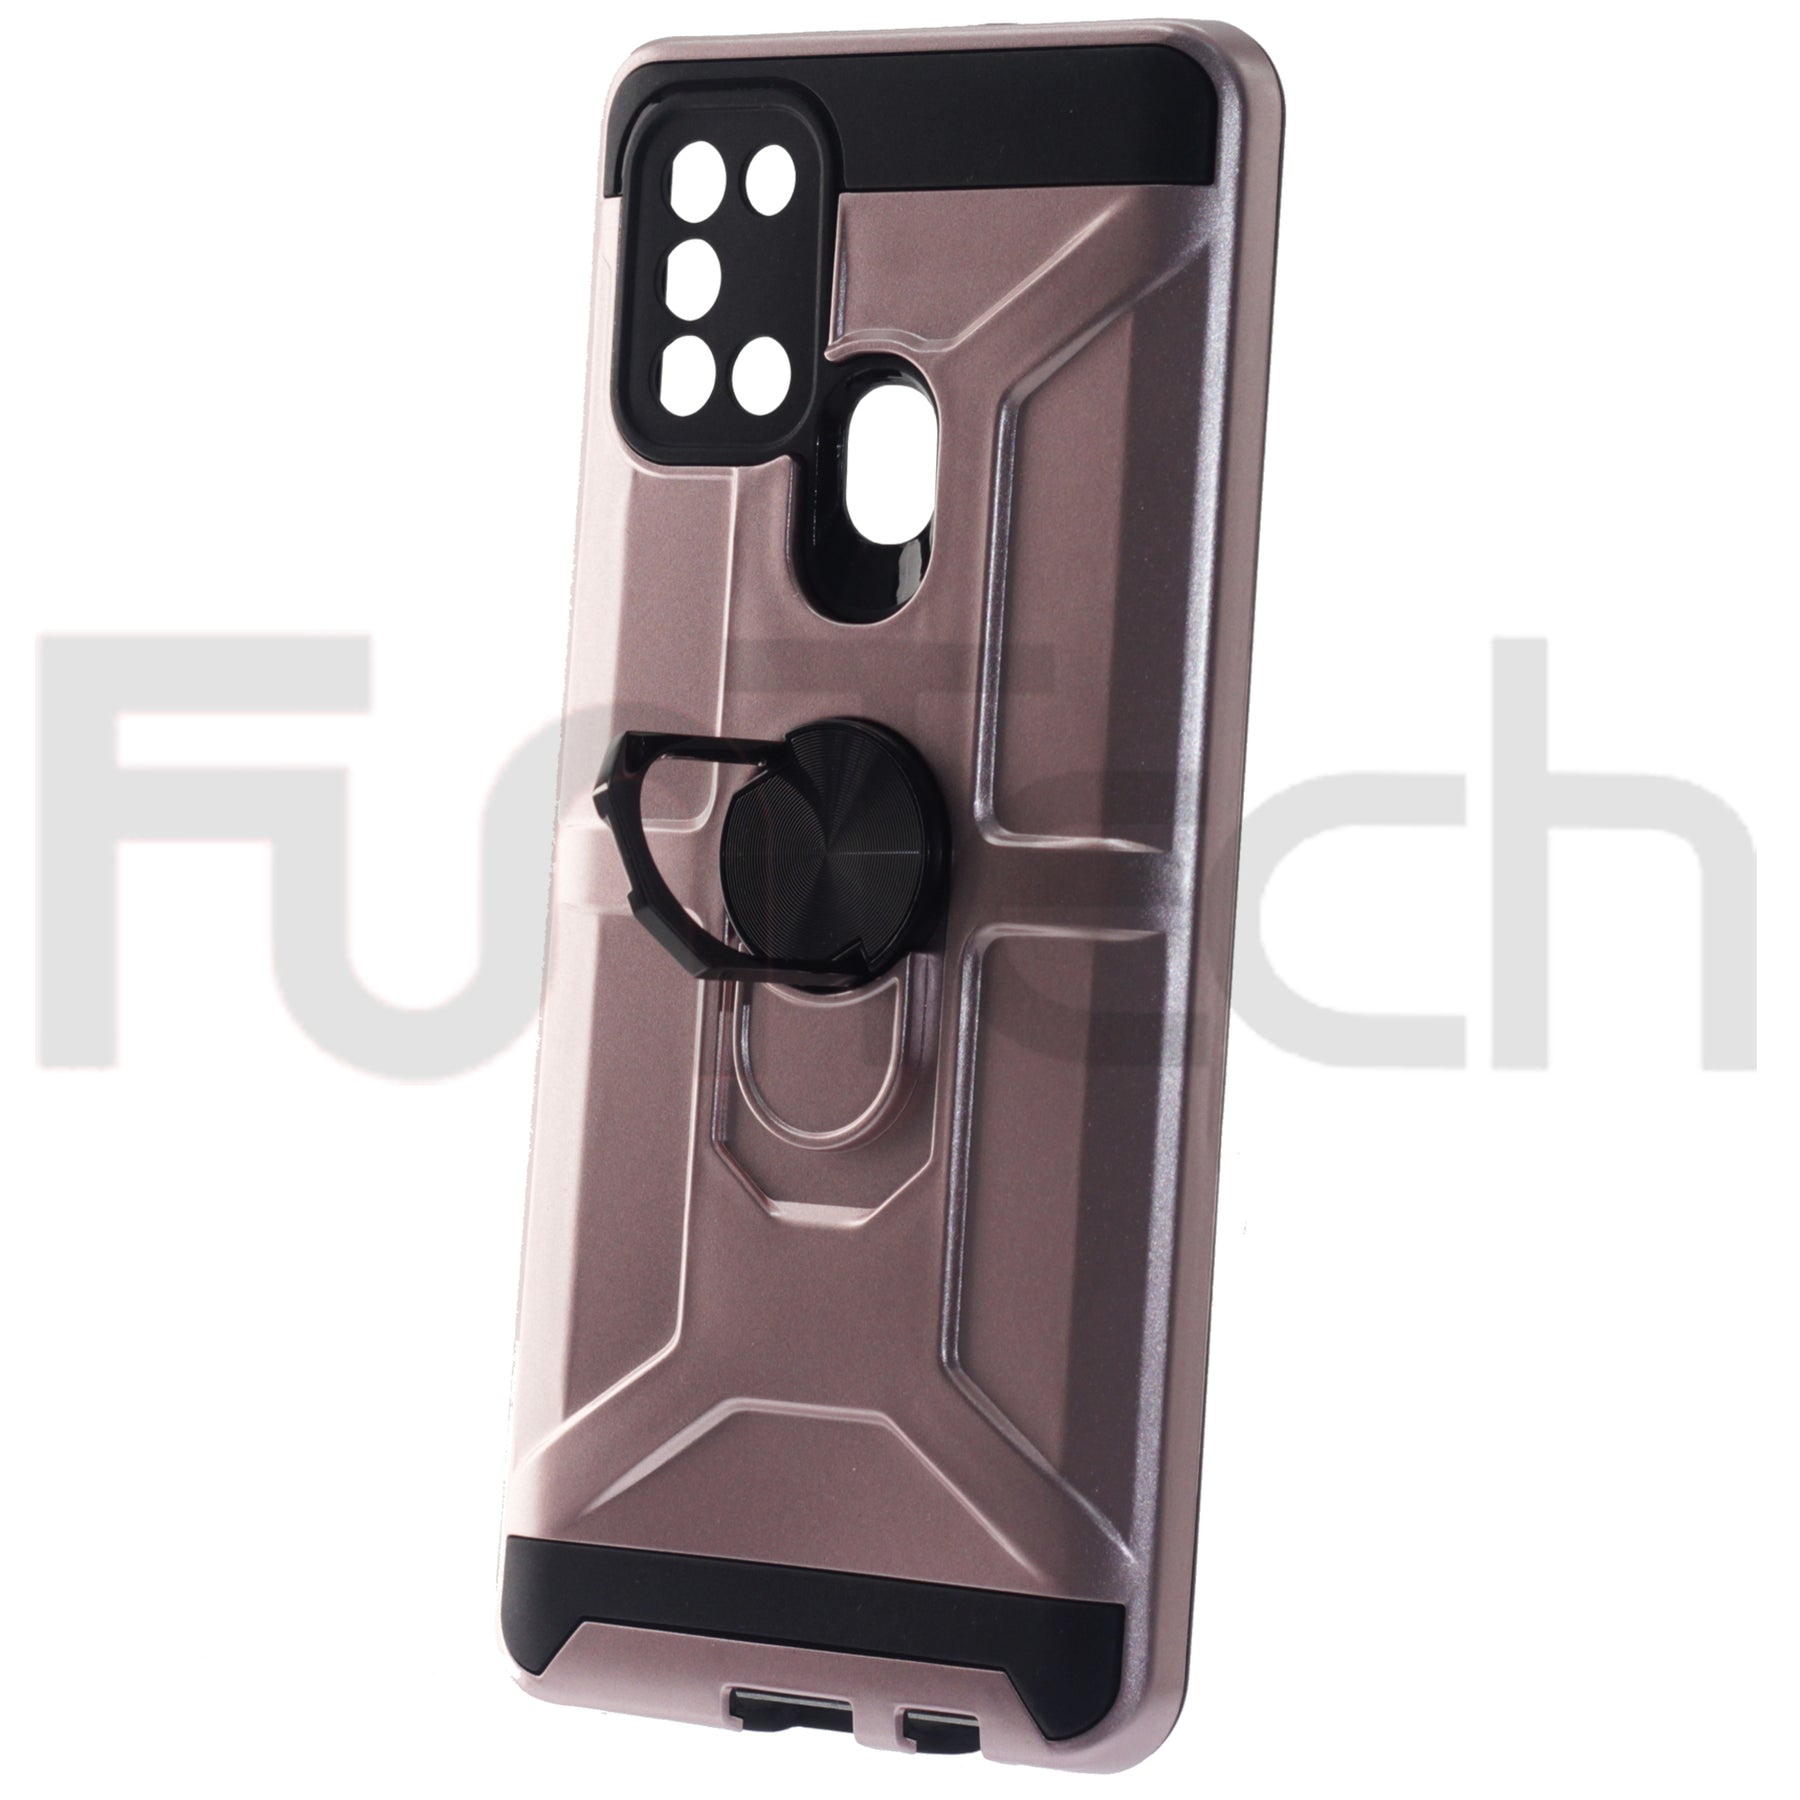 Samsung A21s, Armor Ring Case, Color Rose Gold.